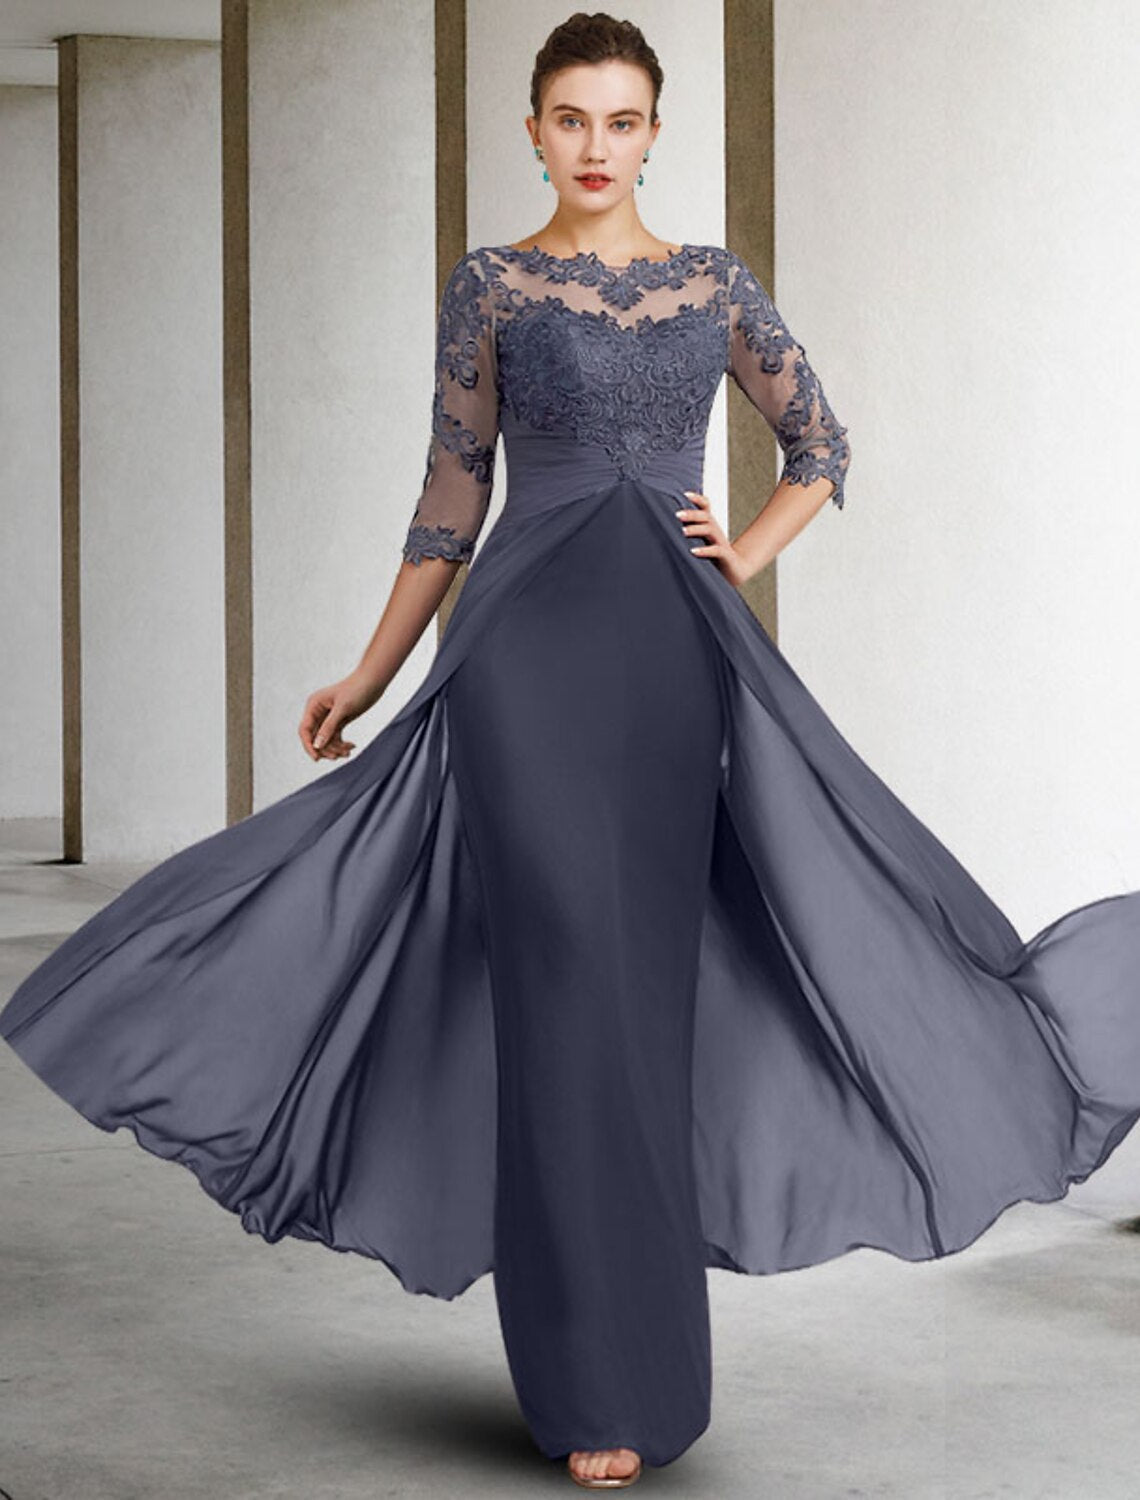 Sheath / Column Mother of the Bride Dress Elegant Jewel Neck Floor Length Chiffon Lace 3/4 Length Sleeve with Ruched Appliques